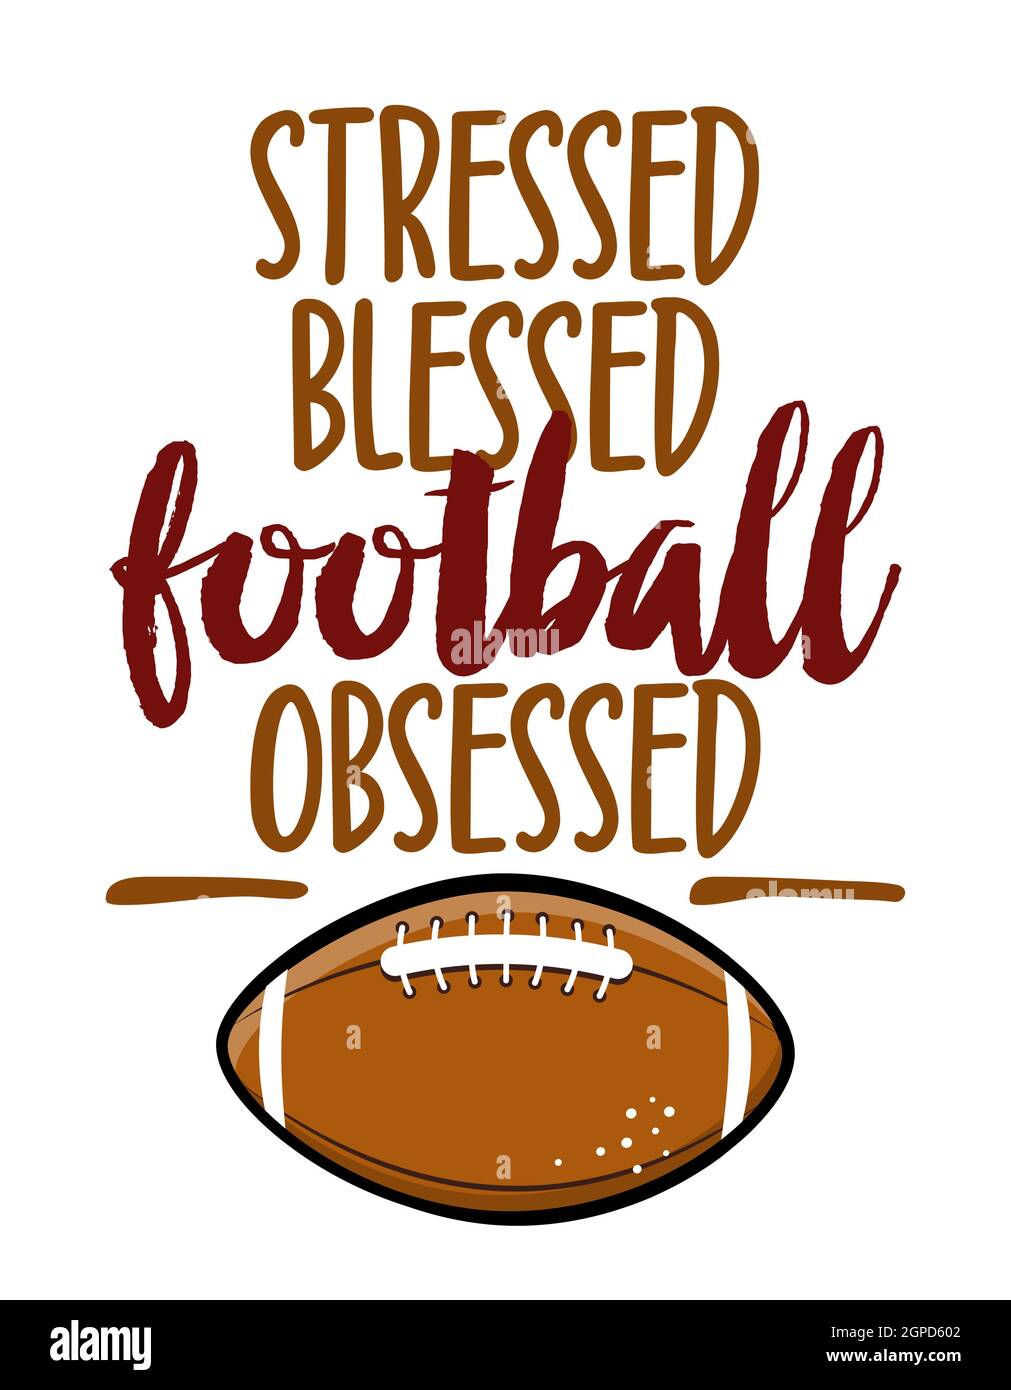 Stressed, blessed, football obsessed - Hand drawn vector illustration. Autumn color poster. Lettering quote for football season. Rugby wisdom t-shirt Stock Vector